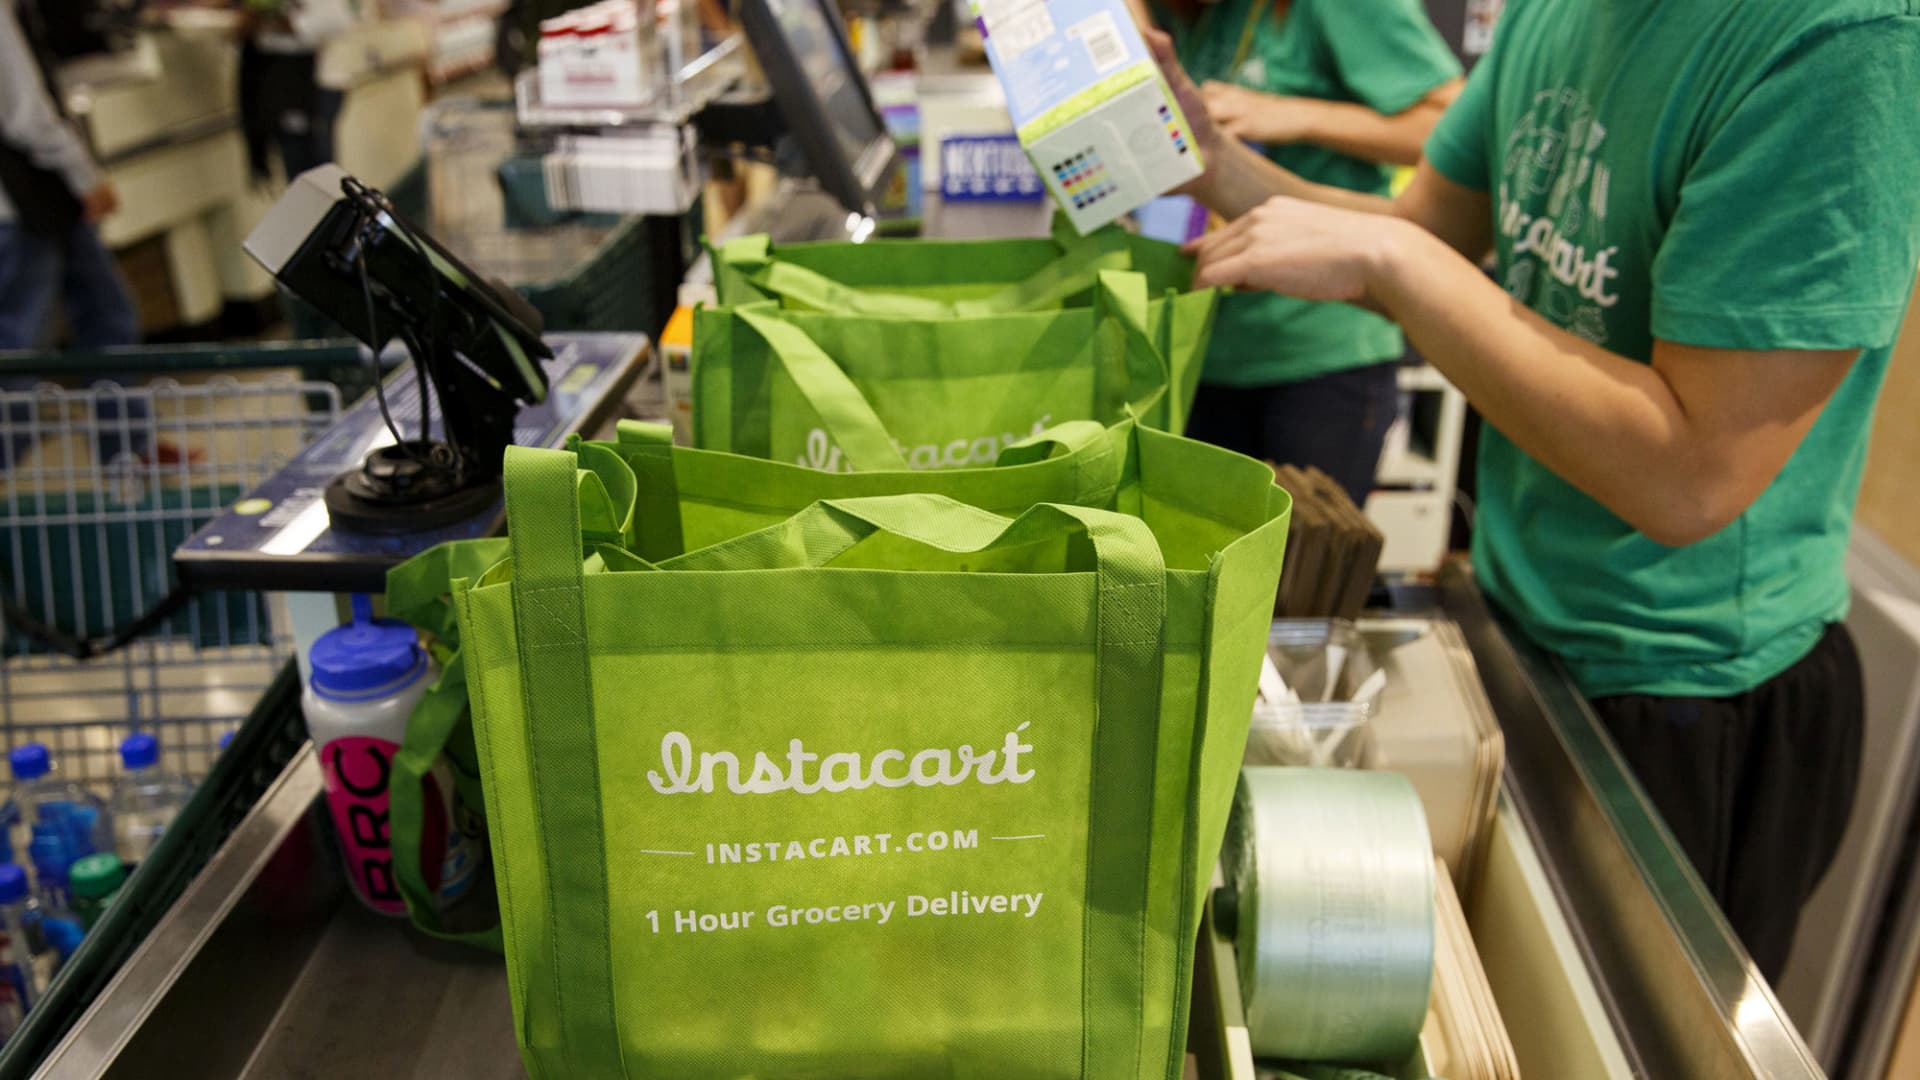 Instacart aiming for valuation of $8.6 billion to $9.3 billion in IPO: reports